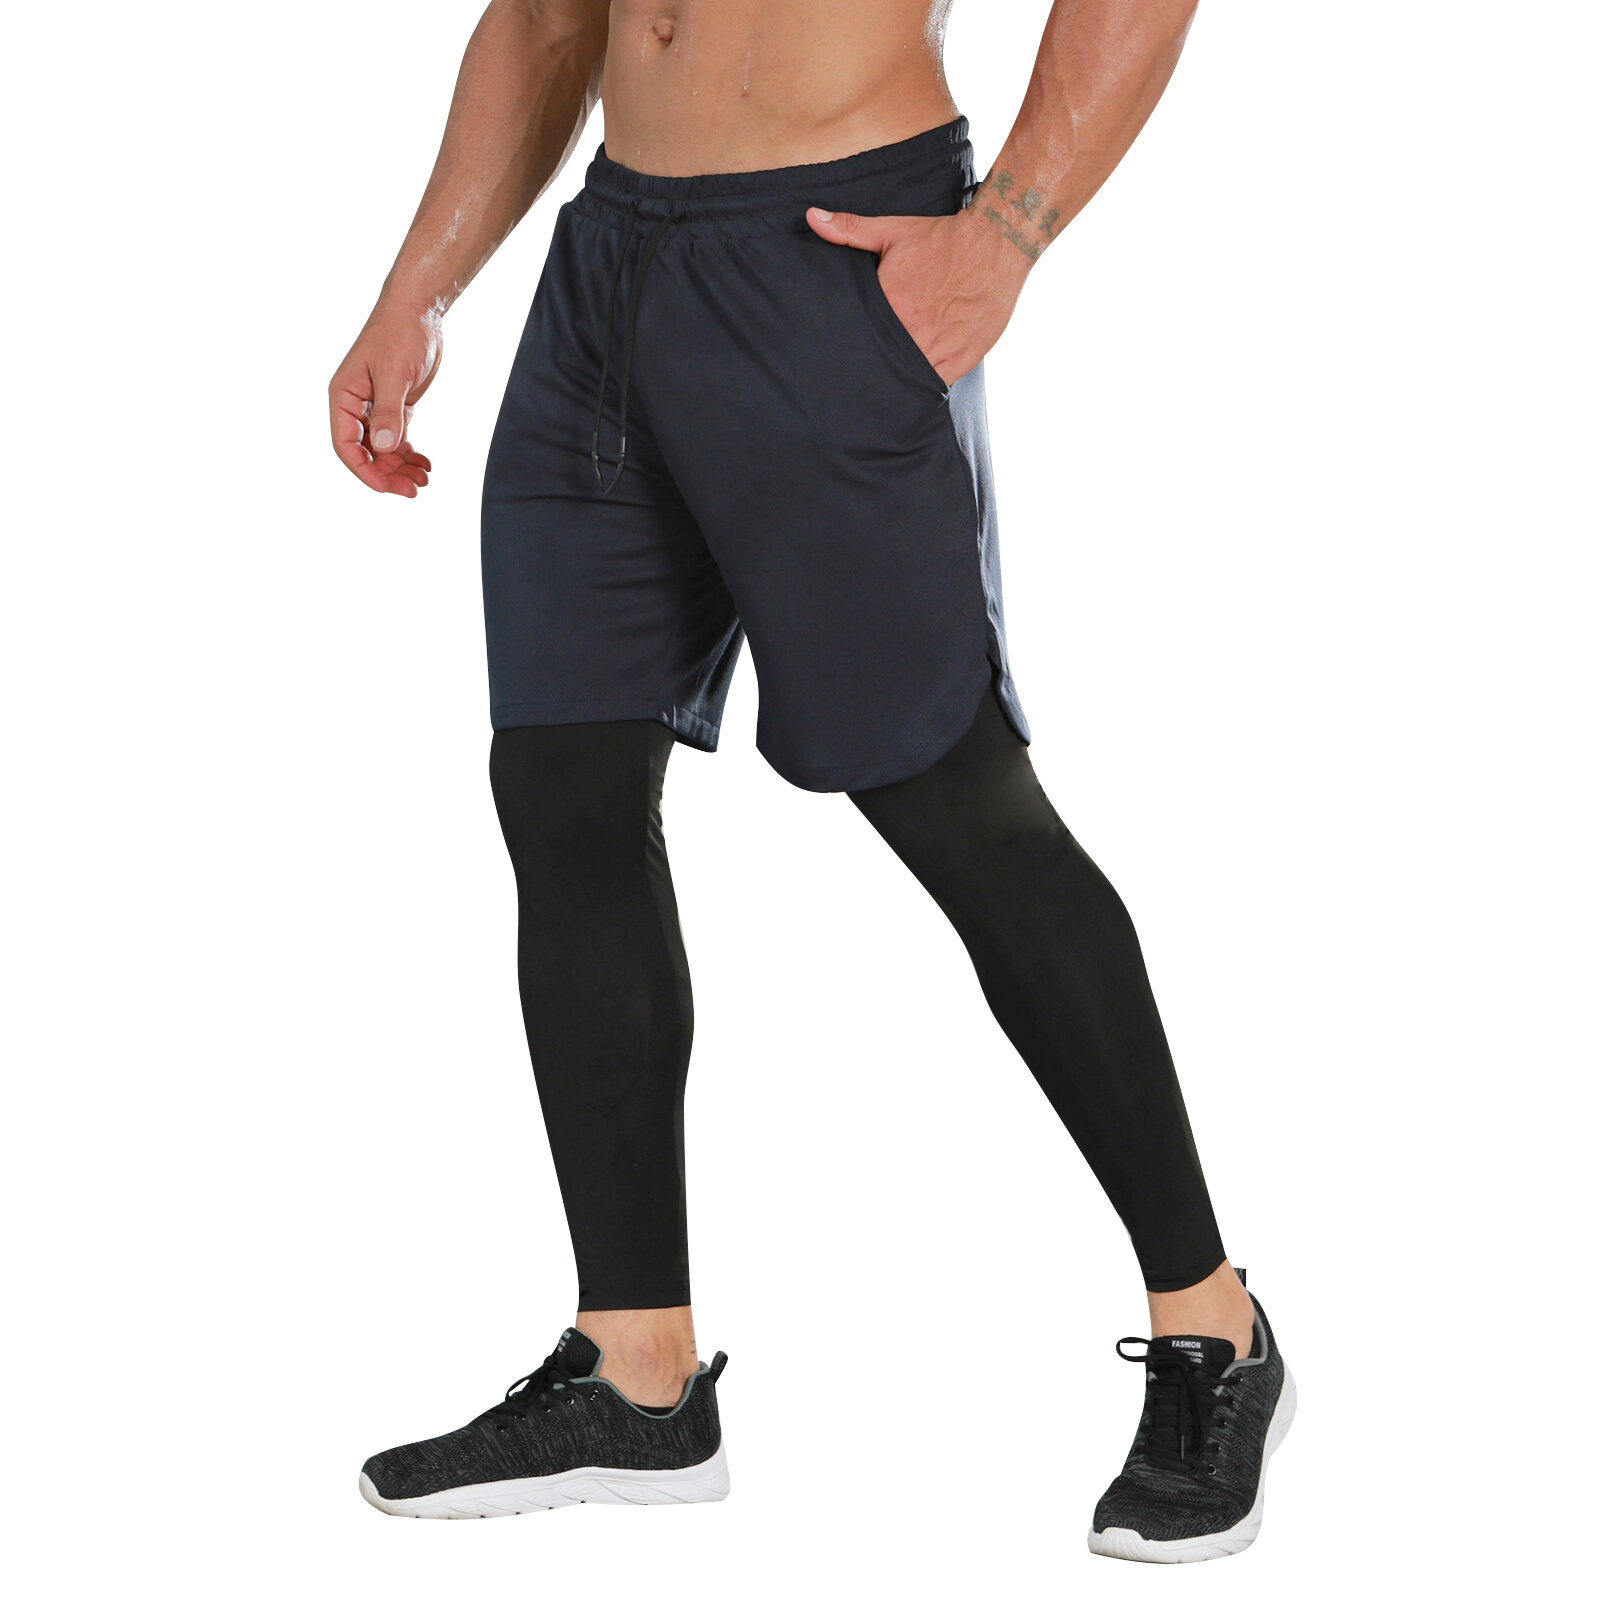 Fashion Men's 2 in 1 Navy Blue  workout Shorts black tight Legging With cell phone pocket